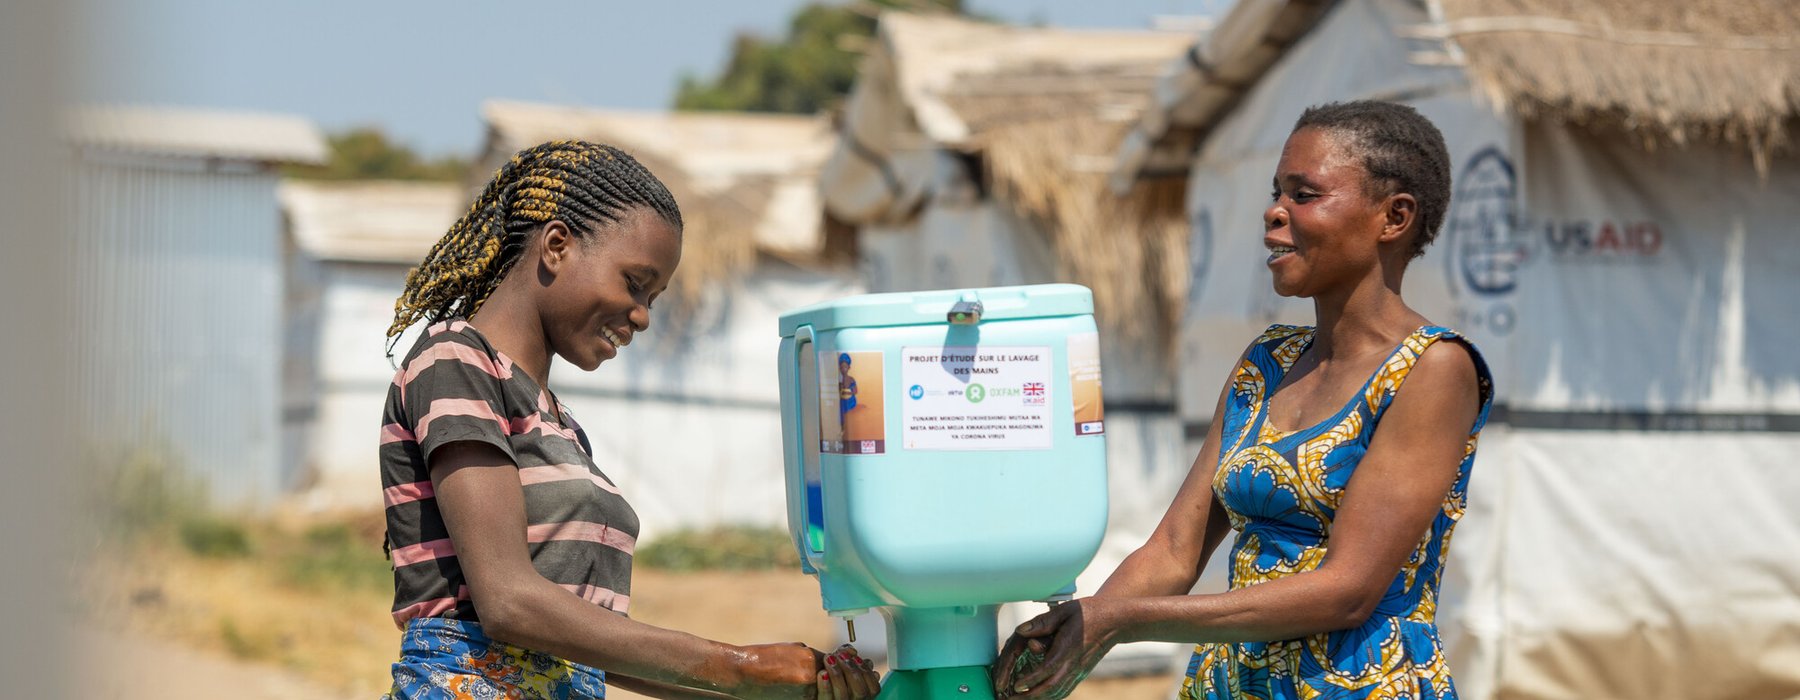 Two young Congolese women wash their hands at a bright blue Oxfam handwashing station on a tripod.